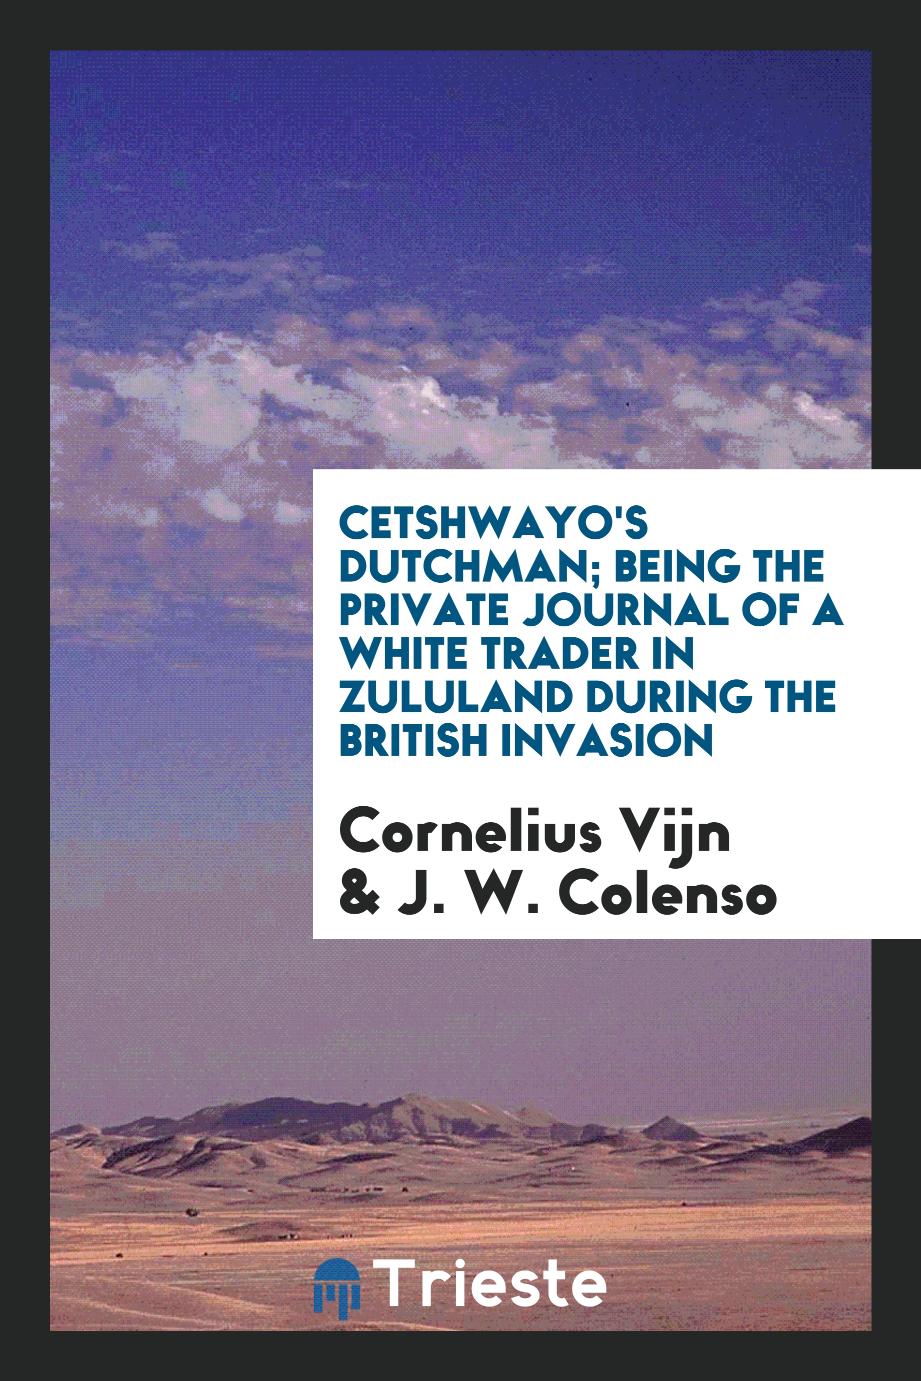 Cetshwayo's Dutchman; being the private journal of a white trader in Zululand during the British invasion